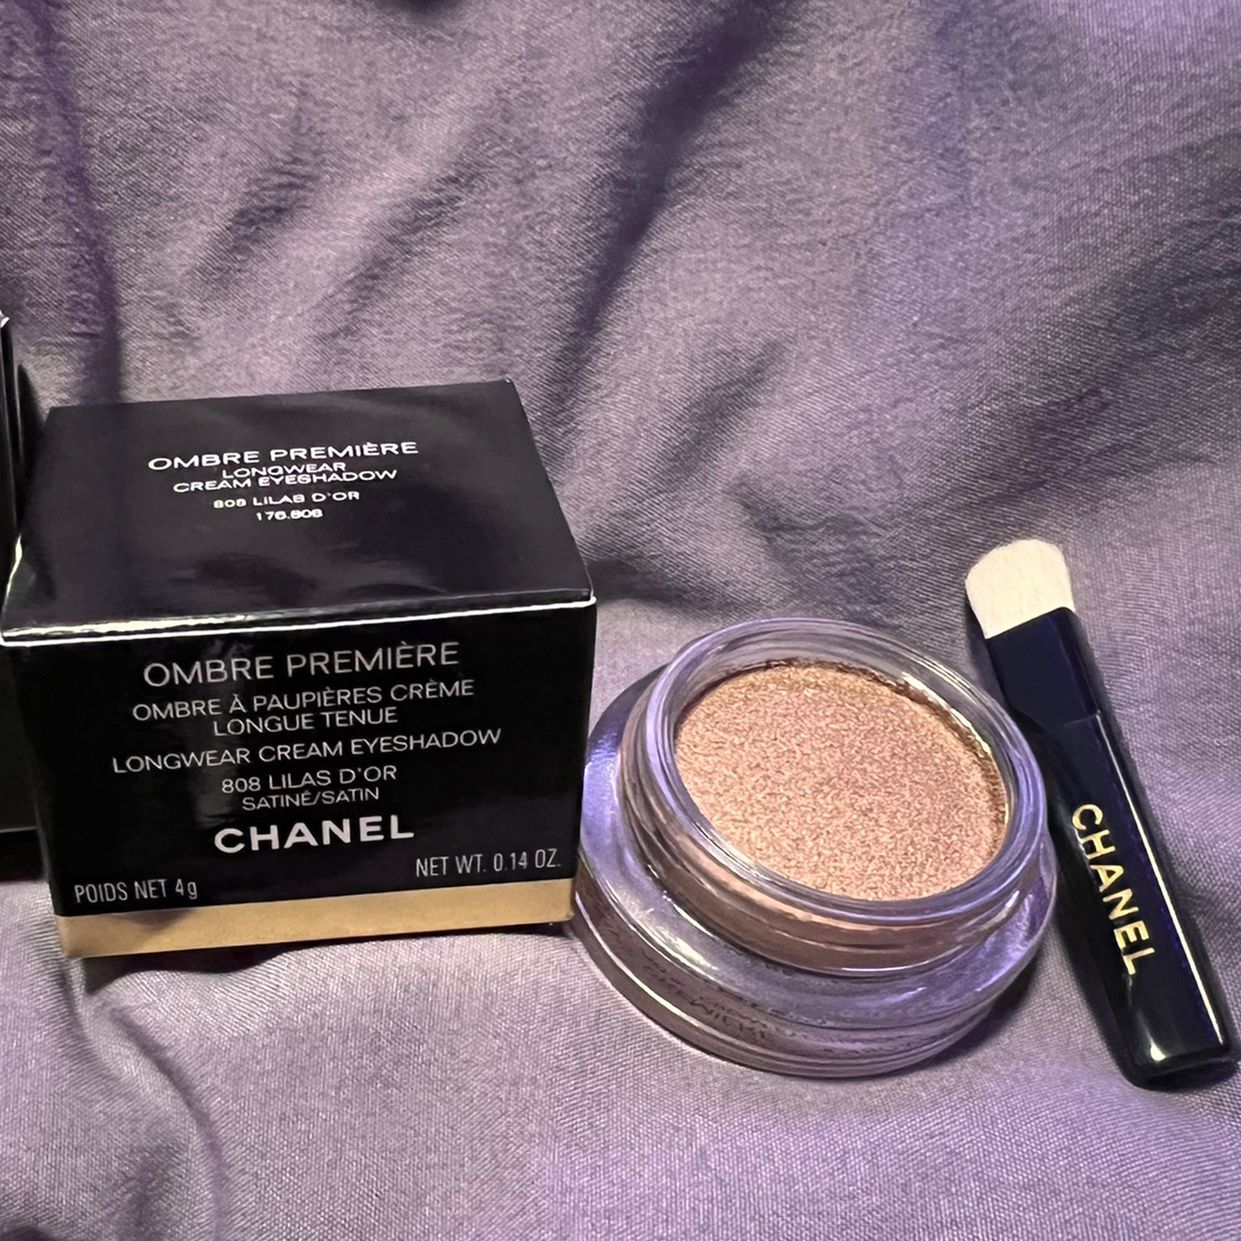 Chanel Verderame (824) Ombre Premiere Longwear Cream Eyeshadow Review &  Swatches